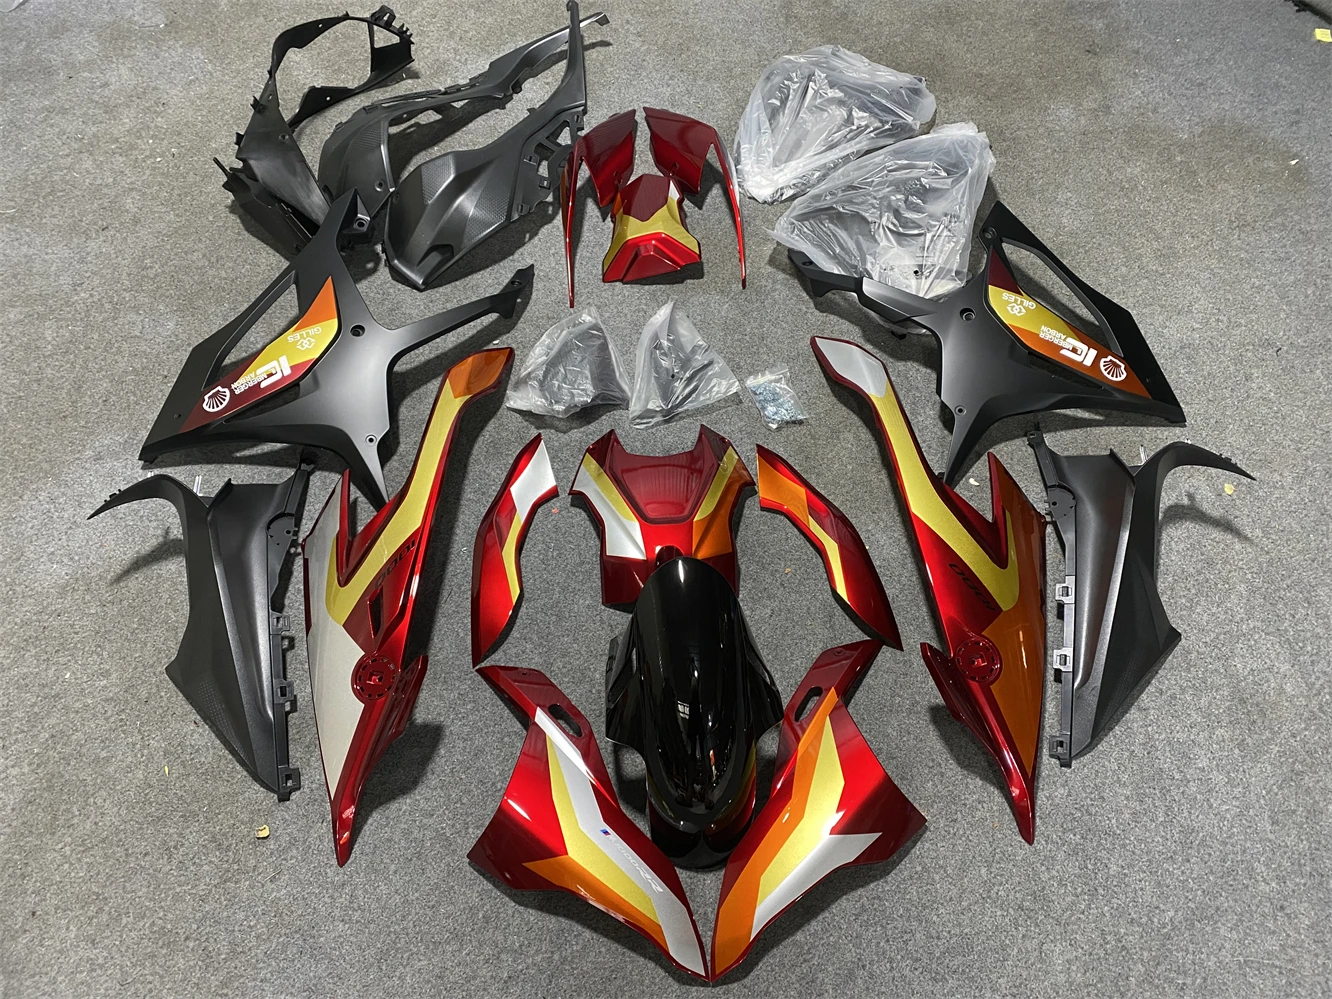 

Topteng Injection Fairing Kit Bodywork Plastic ABS fit for BMW M1000RR S1000RR 2019 2020 2021 2022 S 1000 RR